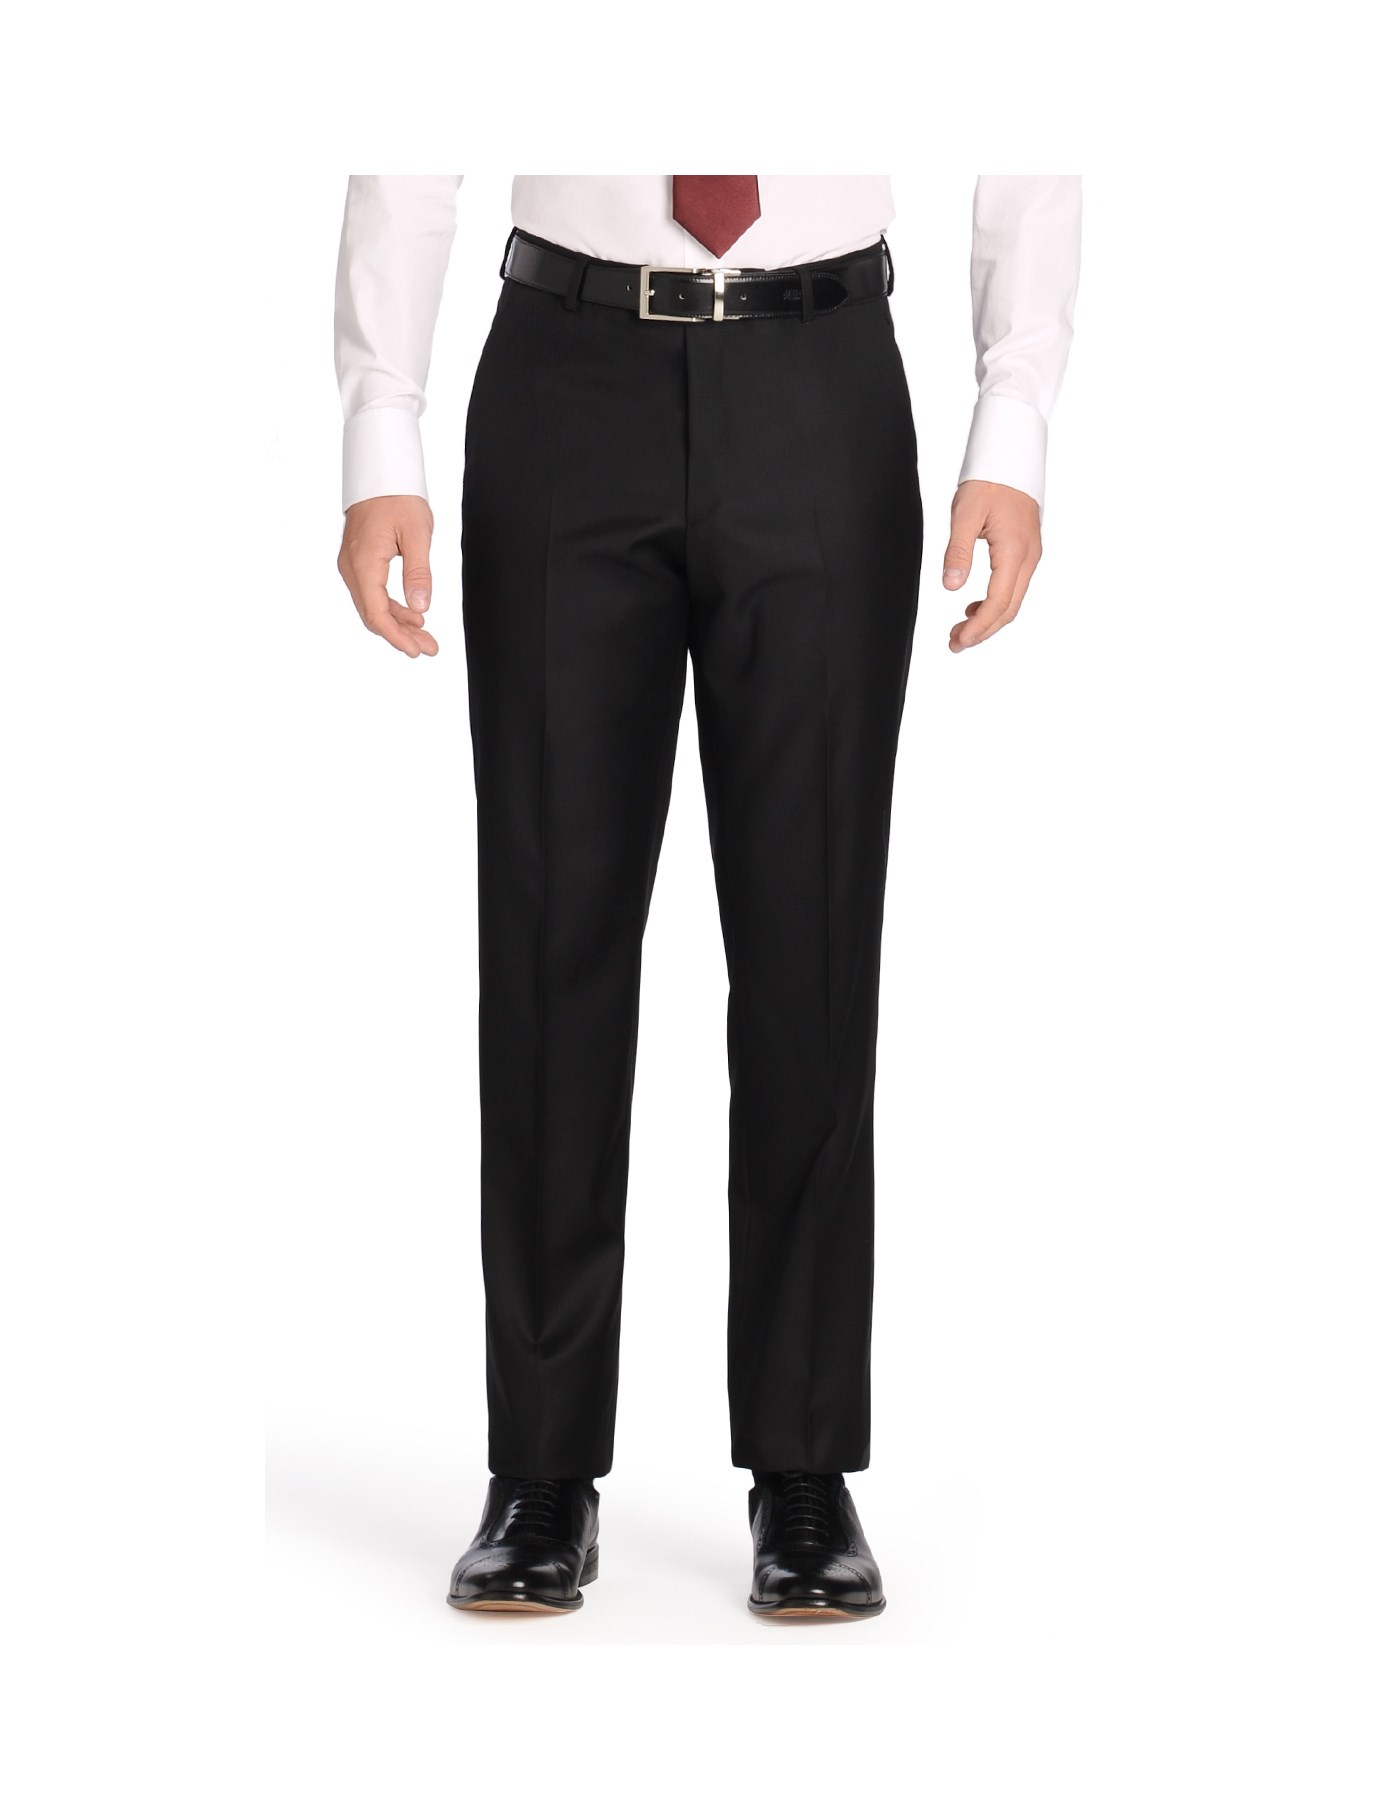 Men's Black Tailored Fit Italian Suit - 1913 Collection | Hawes & Curtis